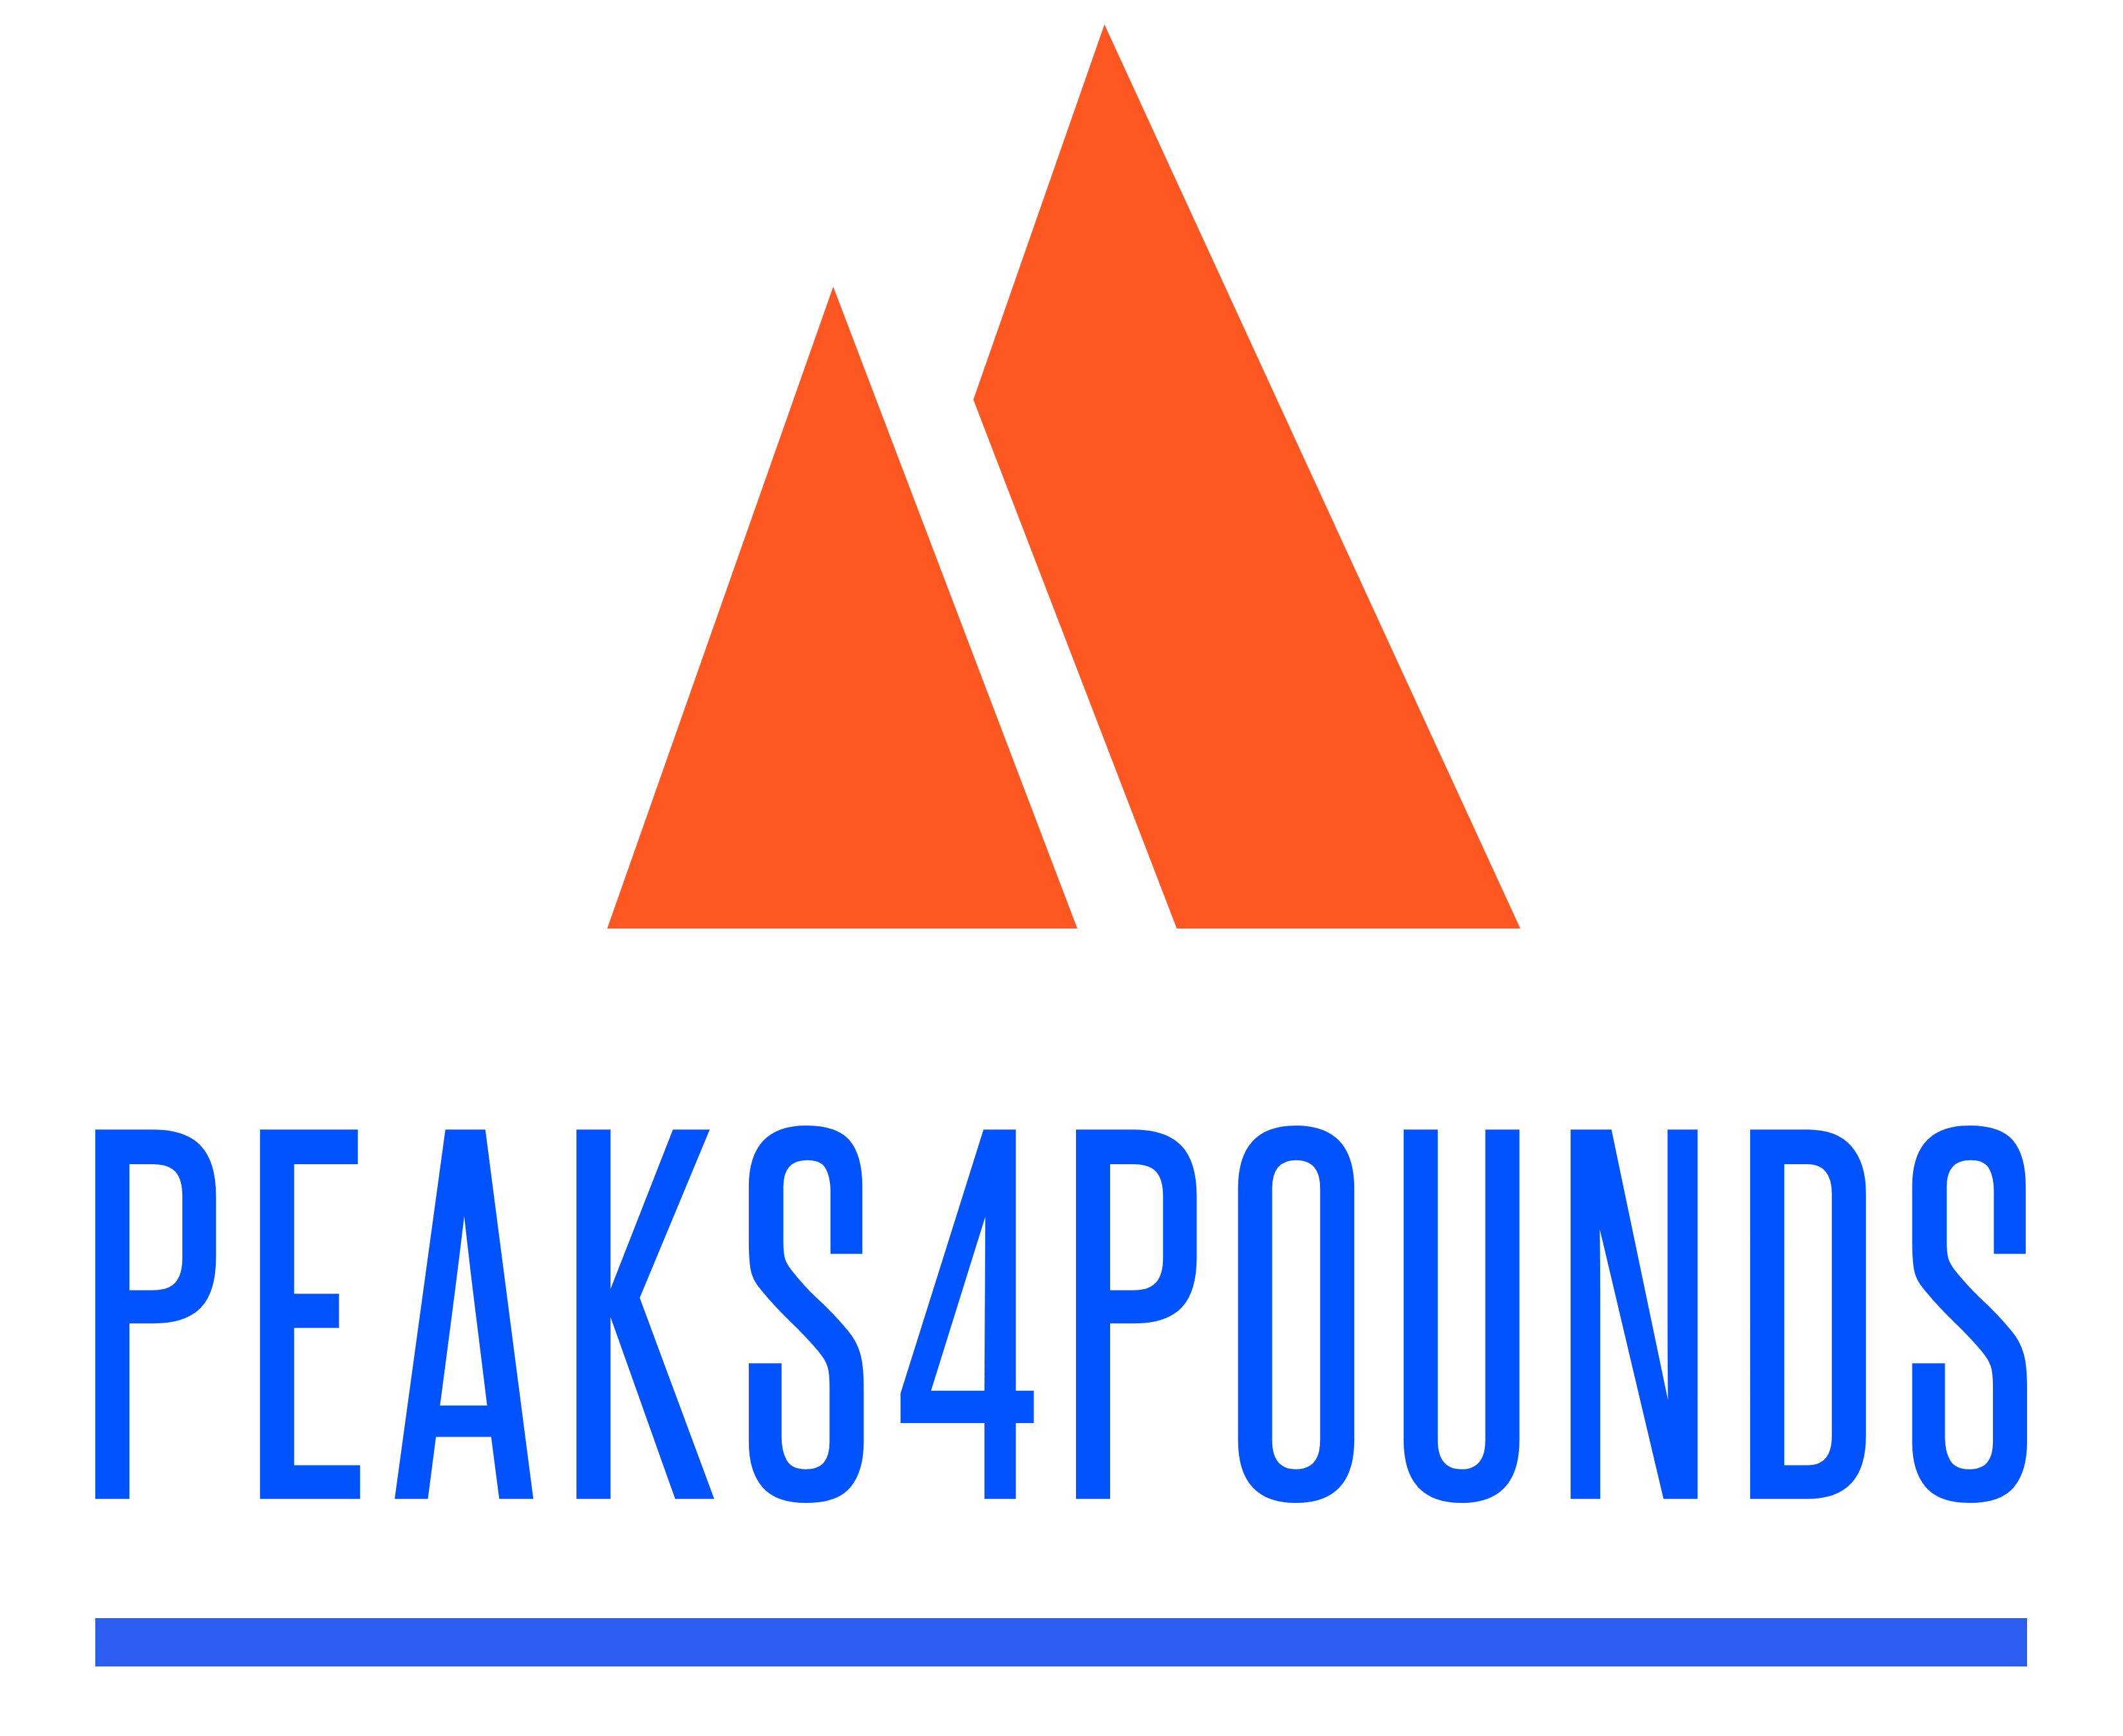 Peaks4Pounds